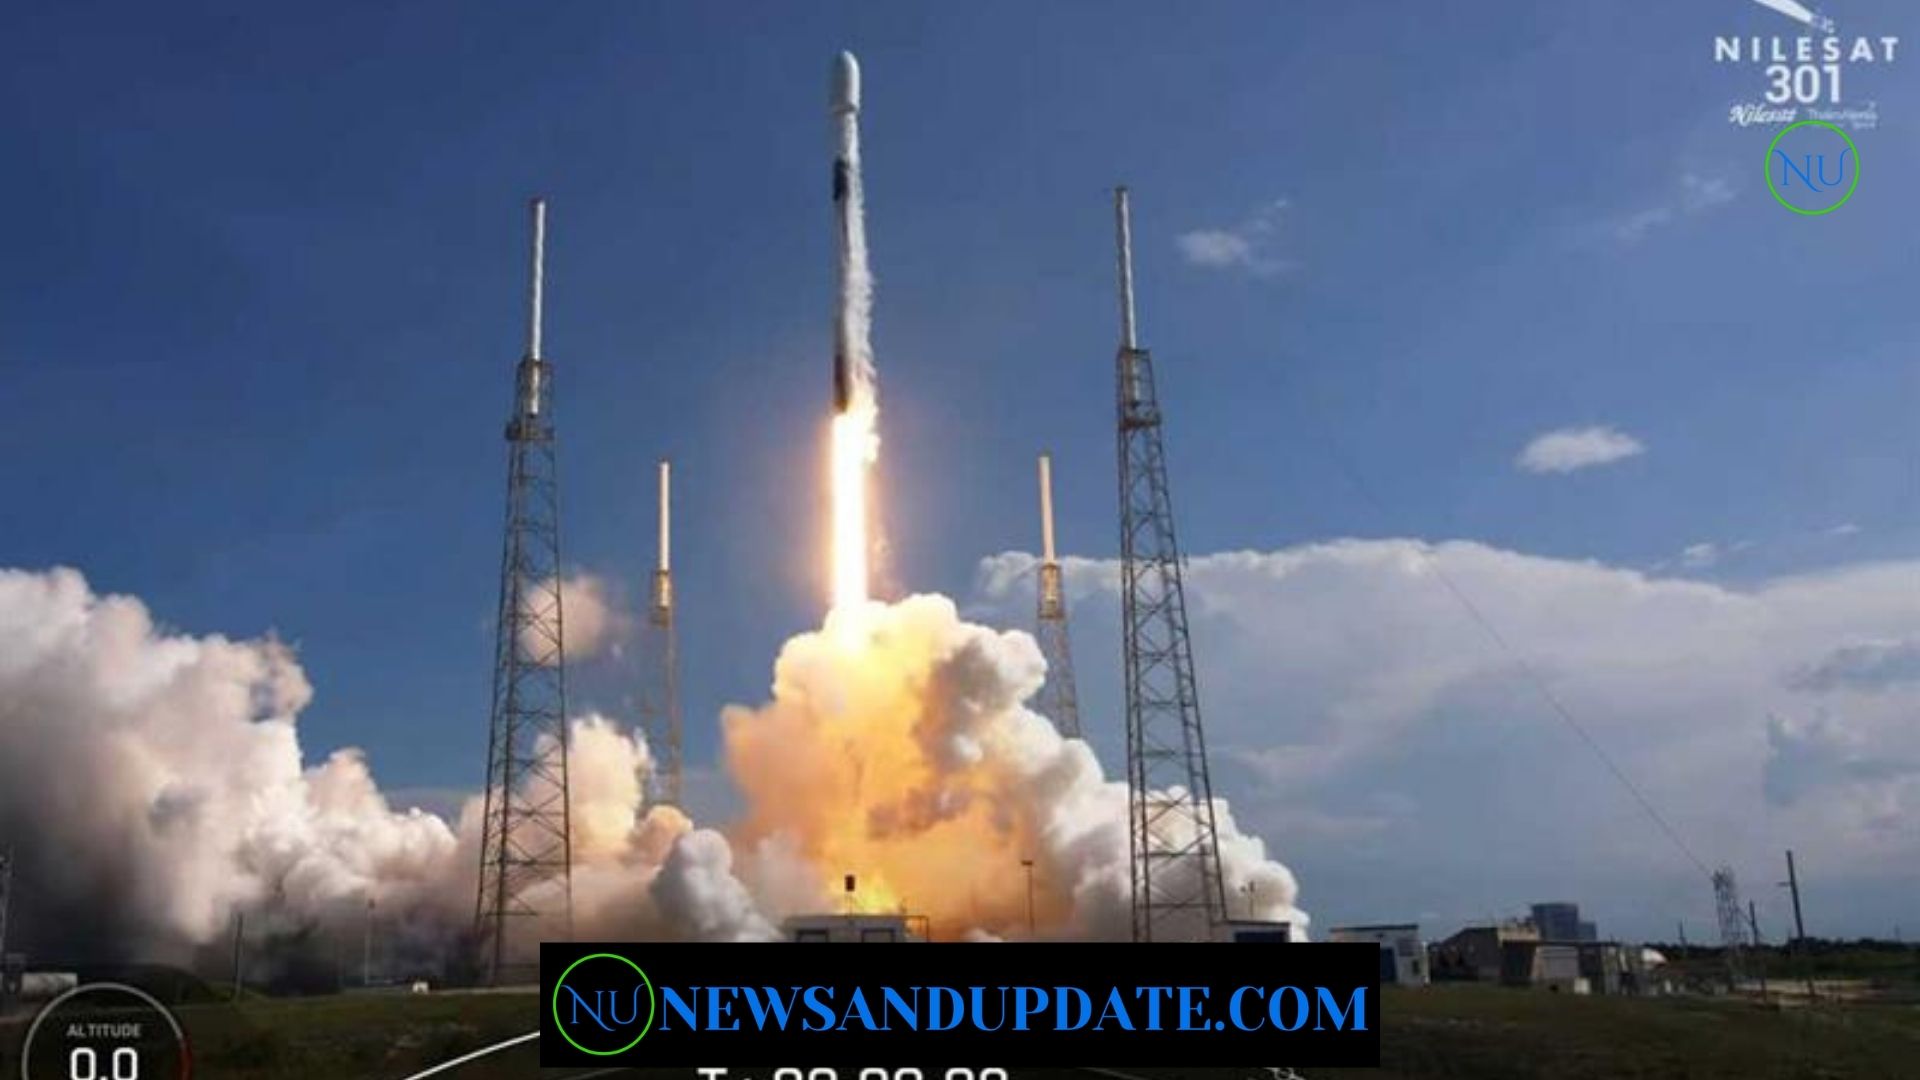 SpaceX launches Egyptian Nilesat 301 Communications Satellite Into Orbit